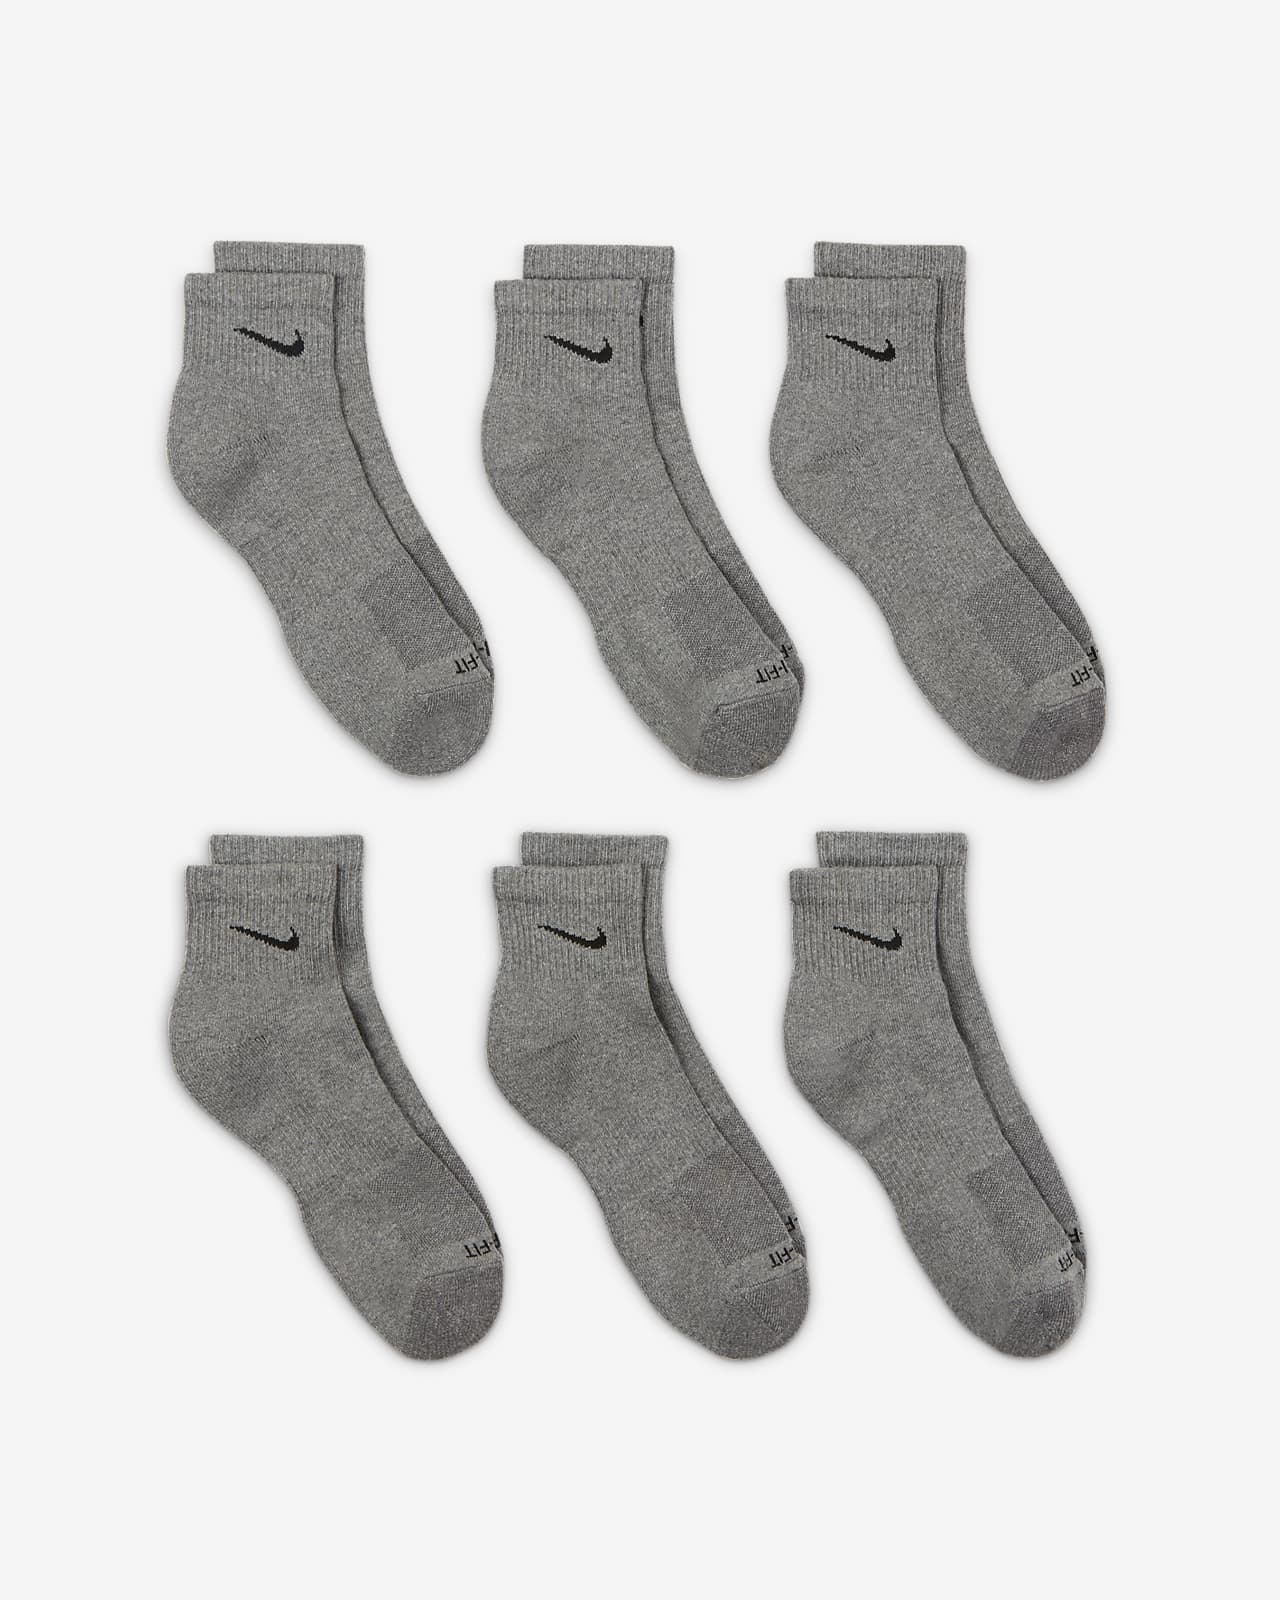  Nike Everyday Plus Cushion Low Socks 3-Pair Pack : Clothing,  Shoes & Jewelry